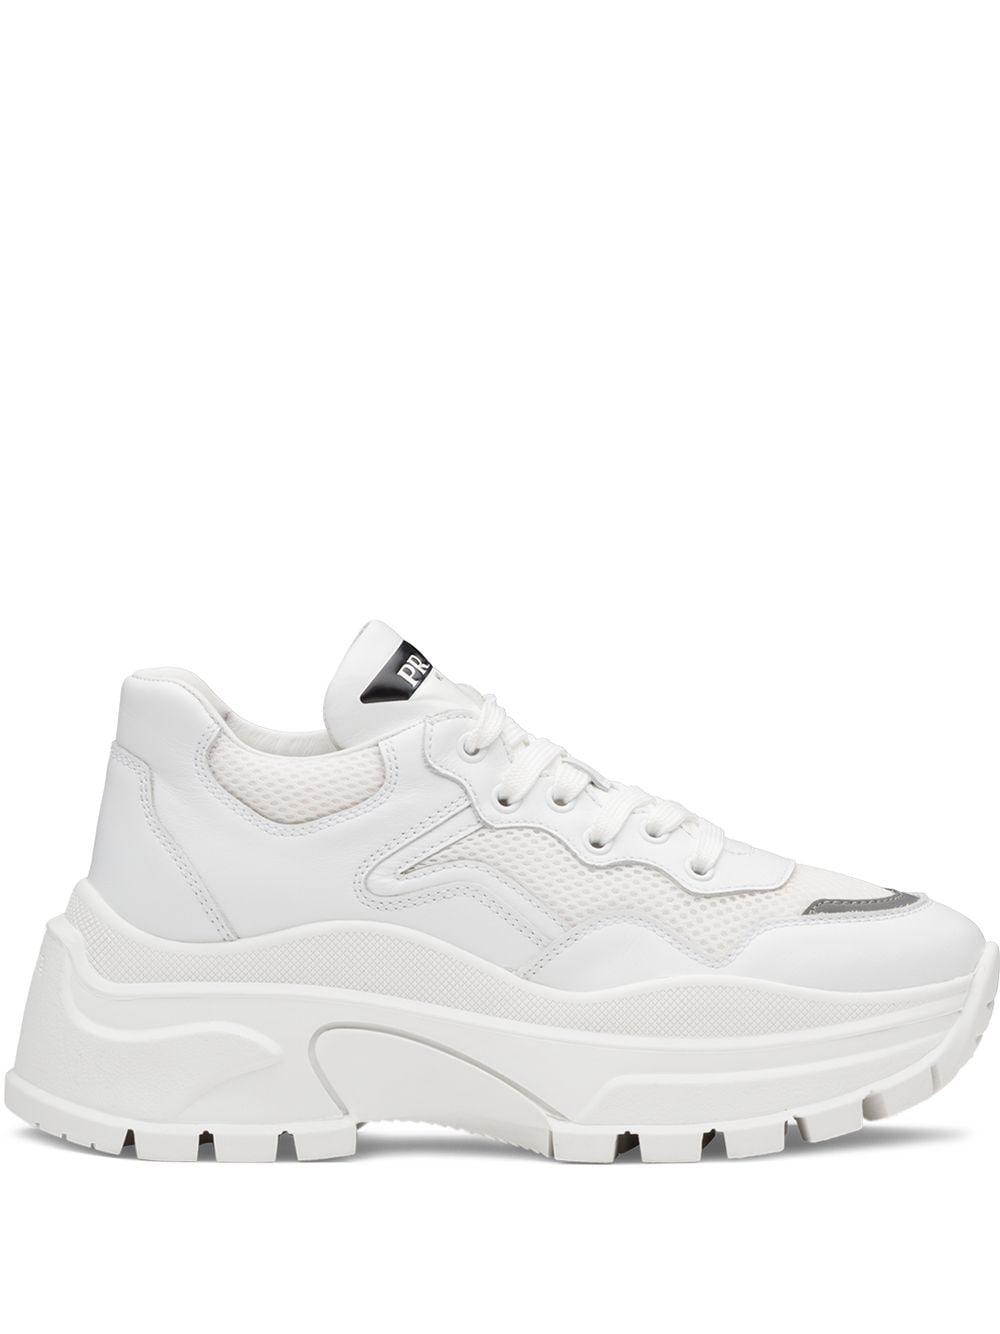 Prada Chunky Panelled Sneakers in White | Lyst